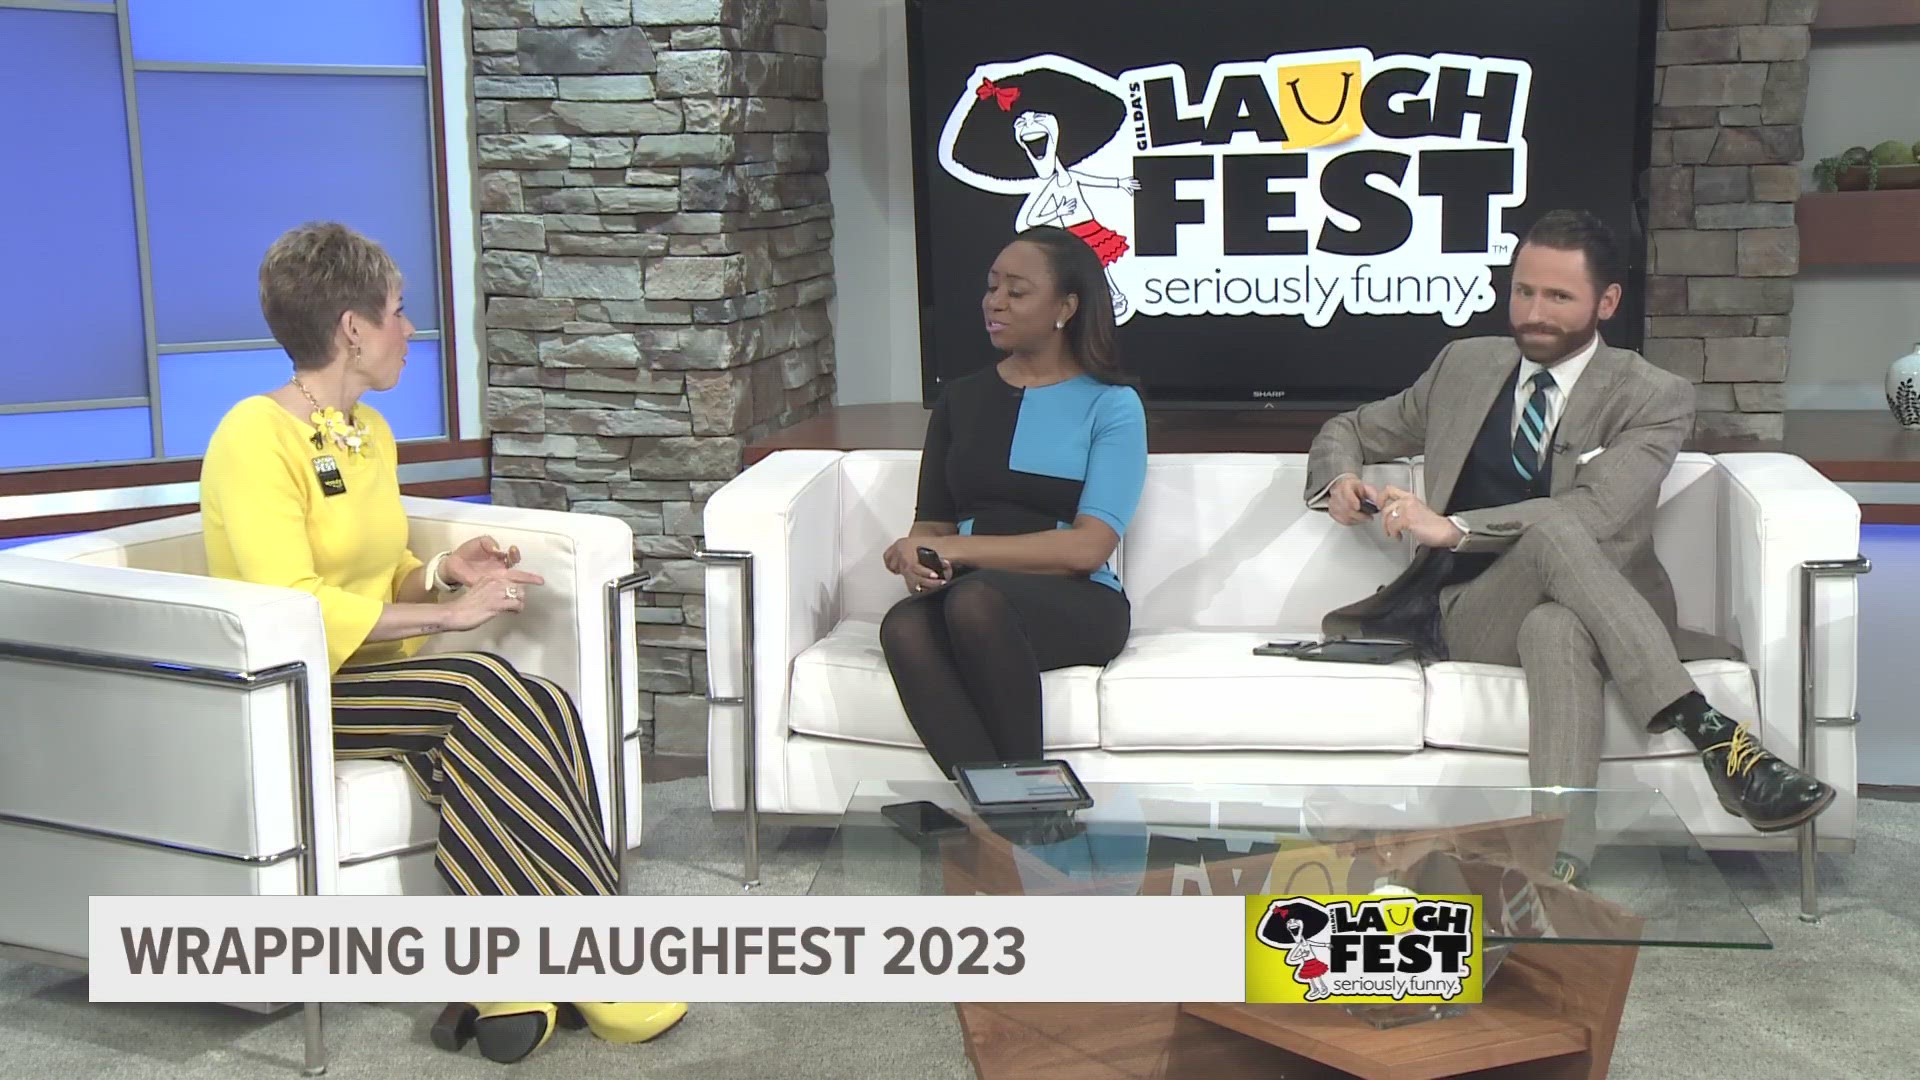 LaughFest President Wendy Wigger joined us to share her favorite moments from the festival and how the proceeds will benefit Gilda's Club.